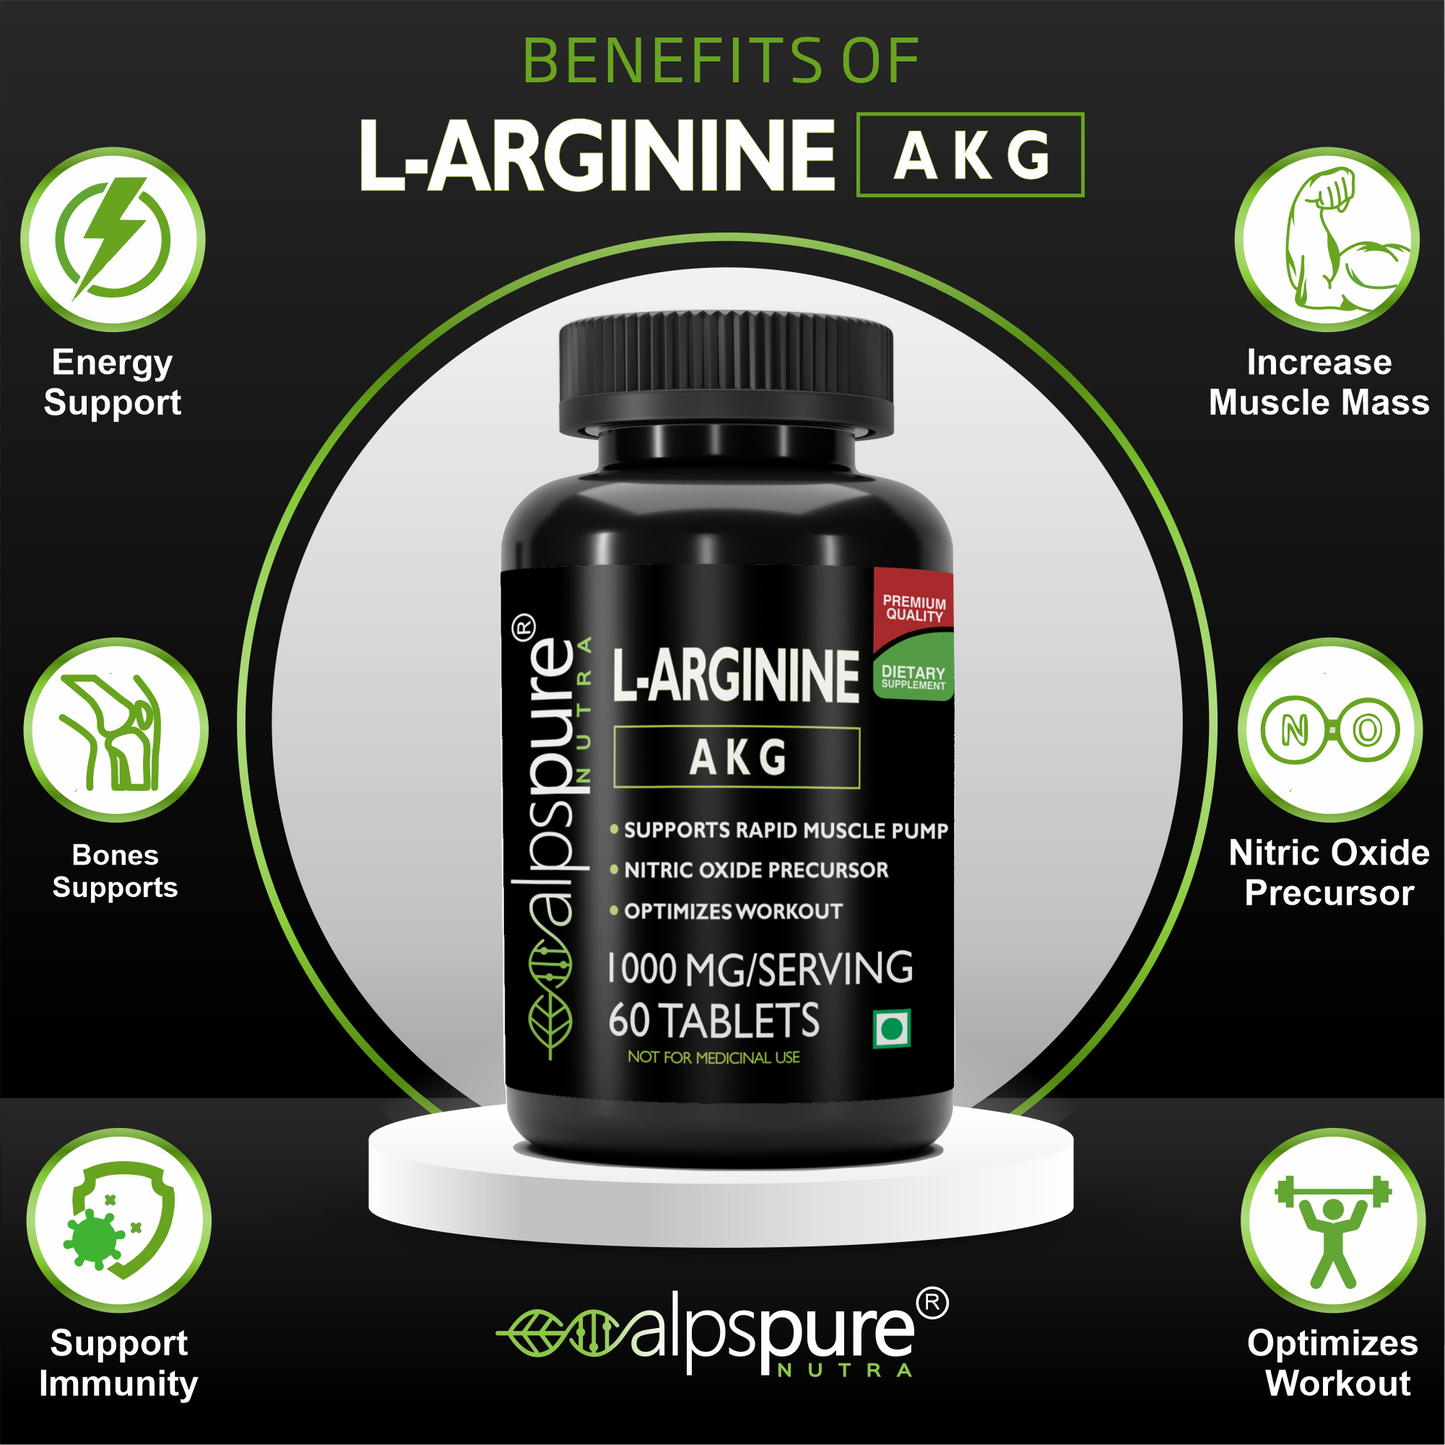 Promote Circulation & Muscle Growth with L-Arginine - Tablets